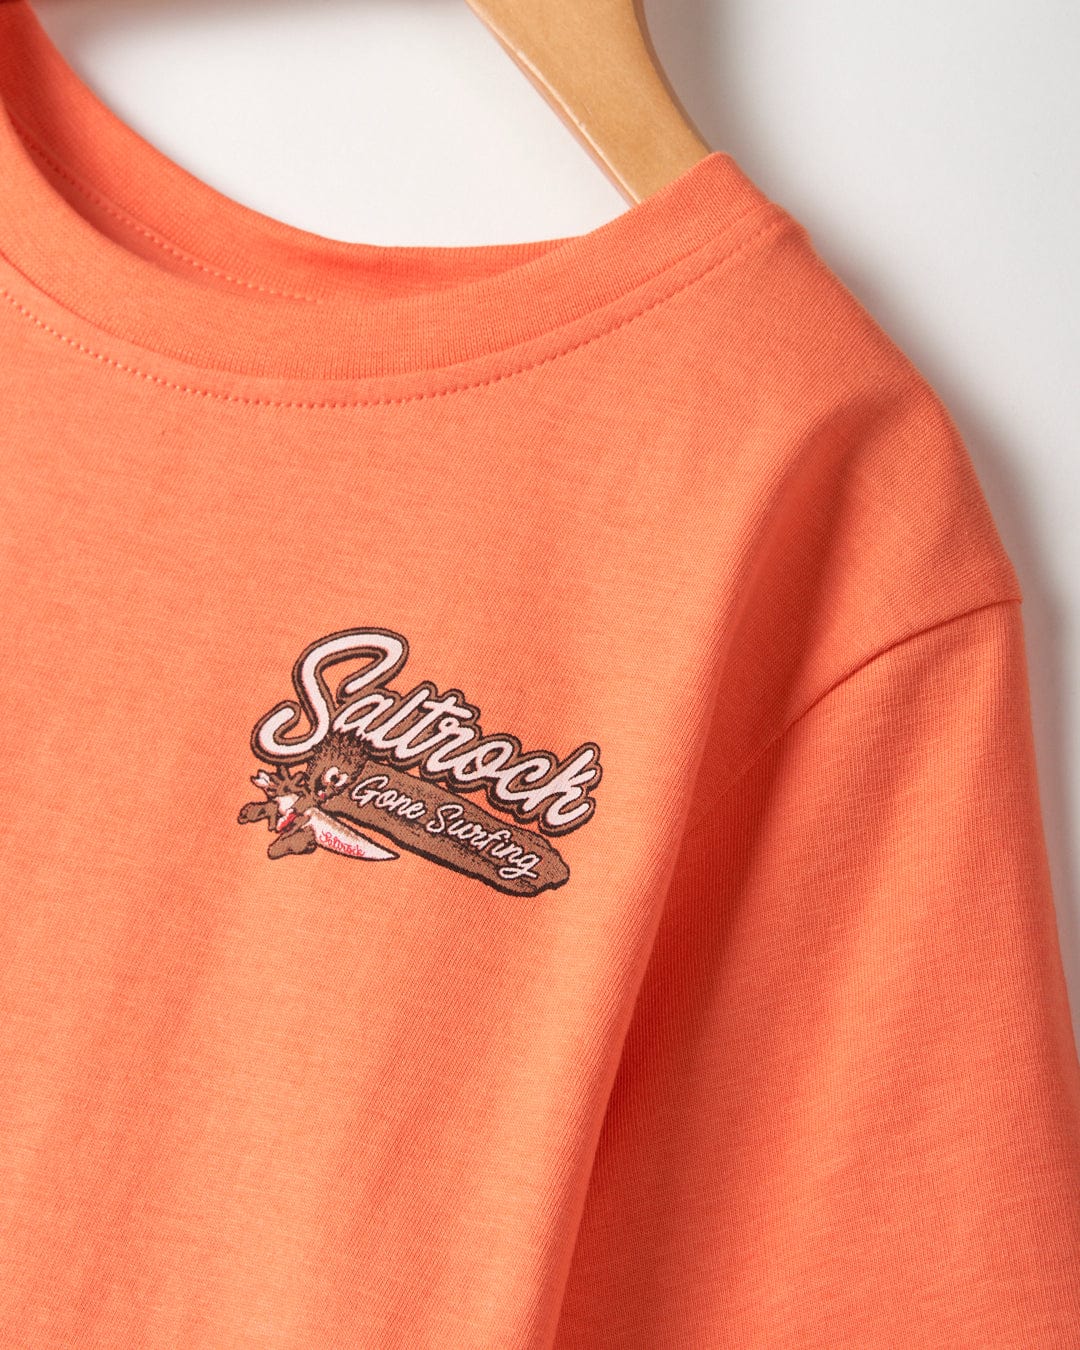 A cotton orange t-shirt with Beach Signs Wales branding on it.